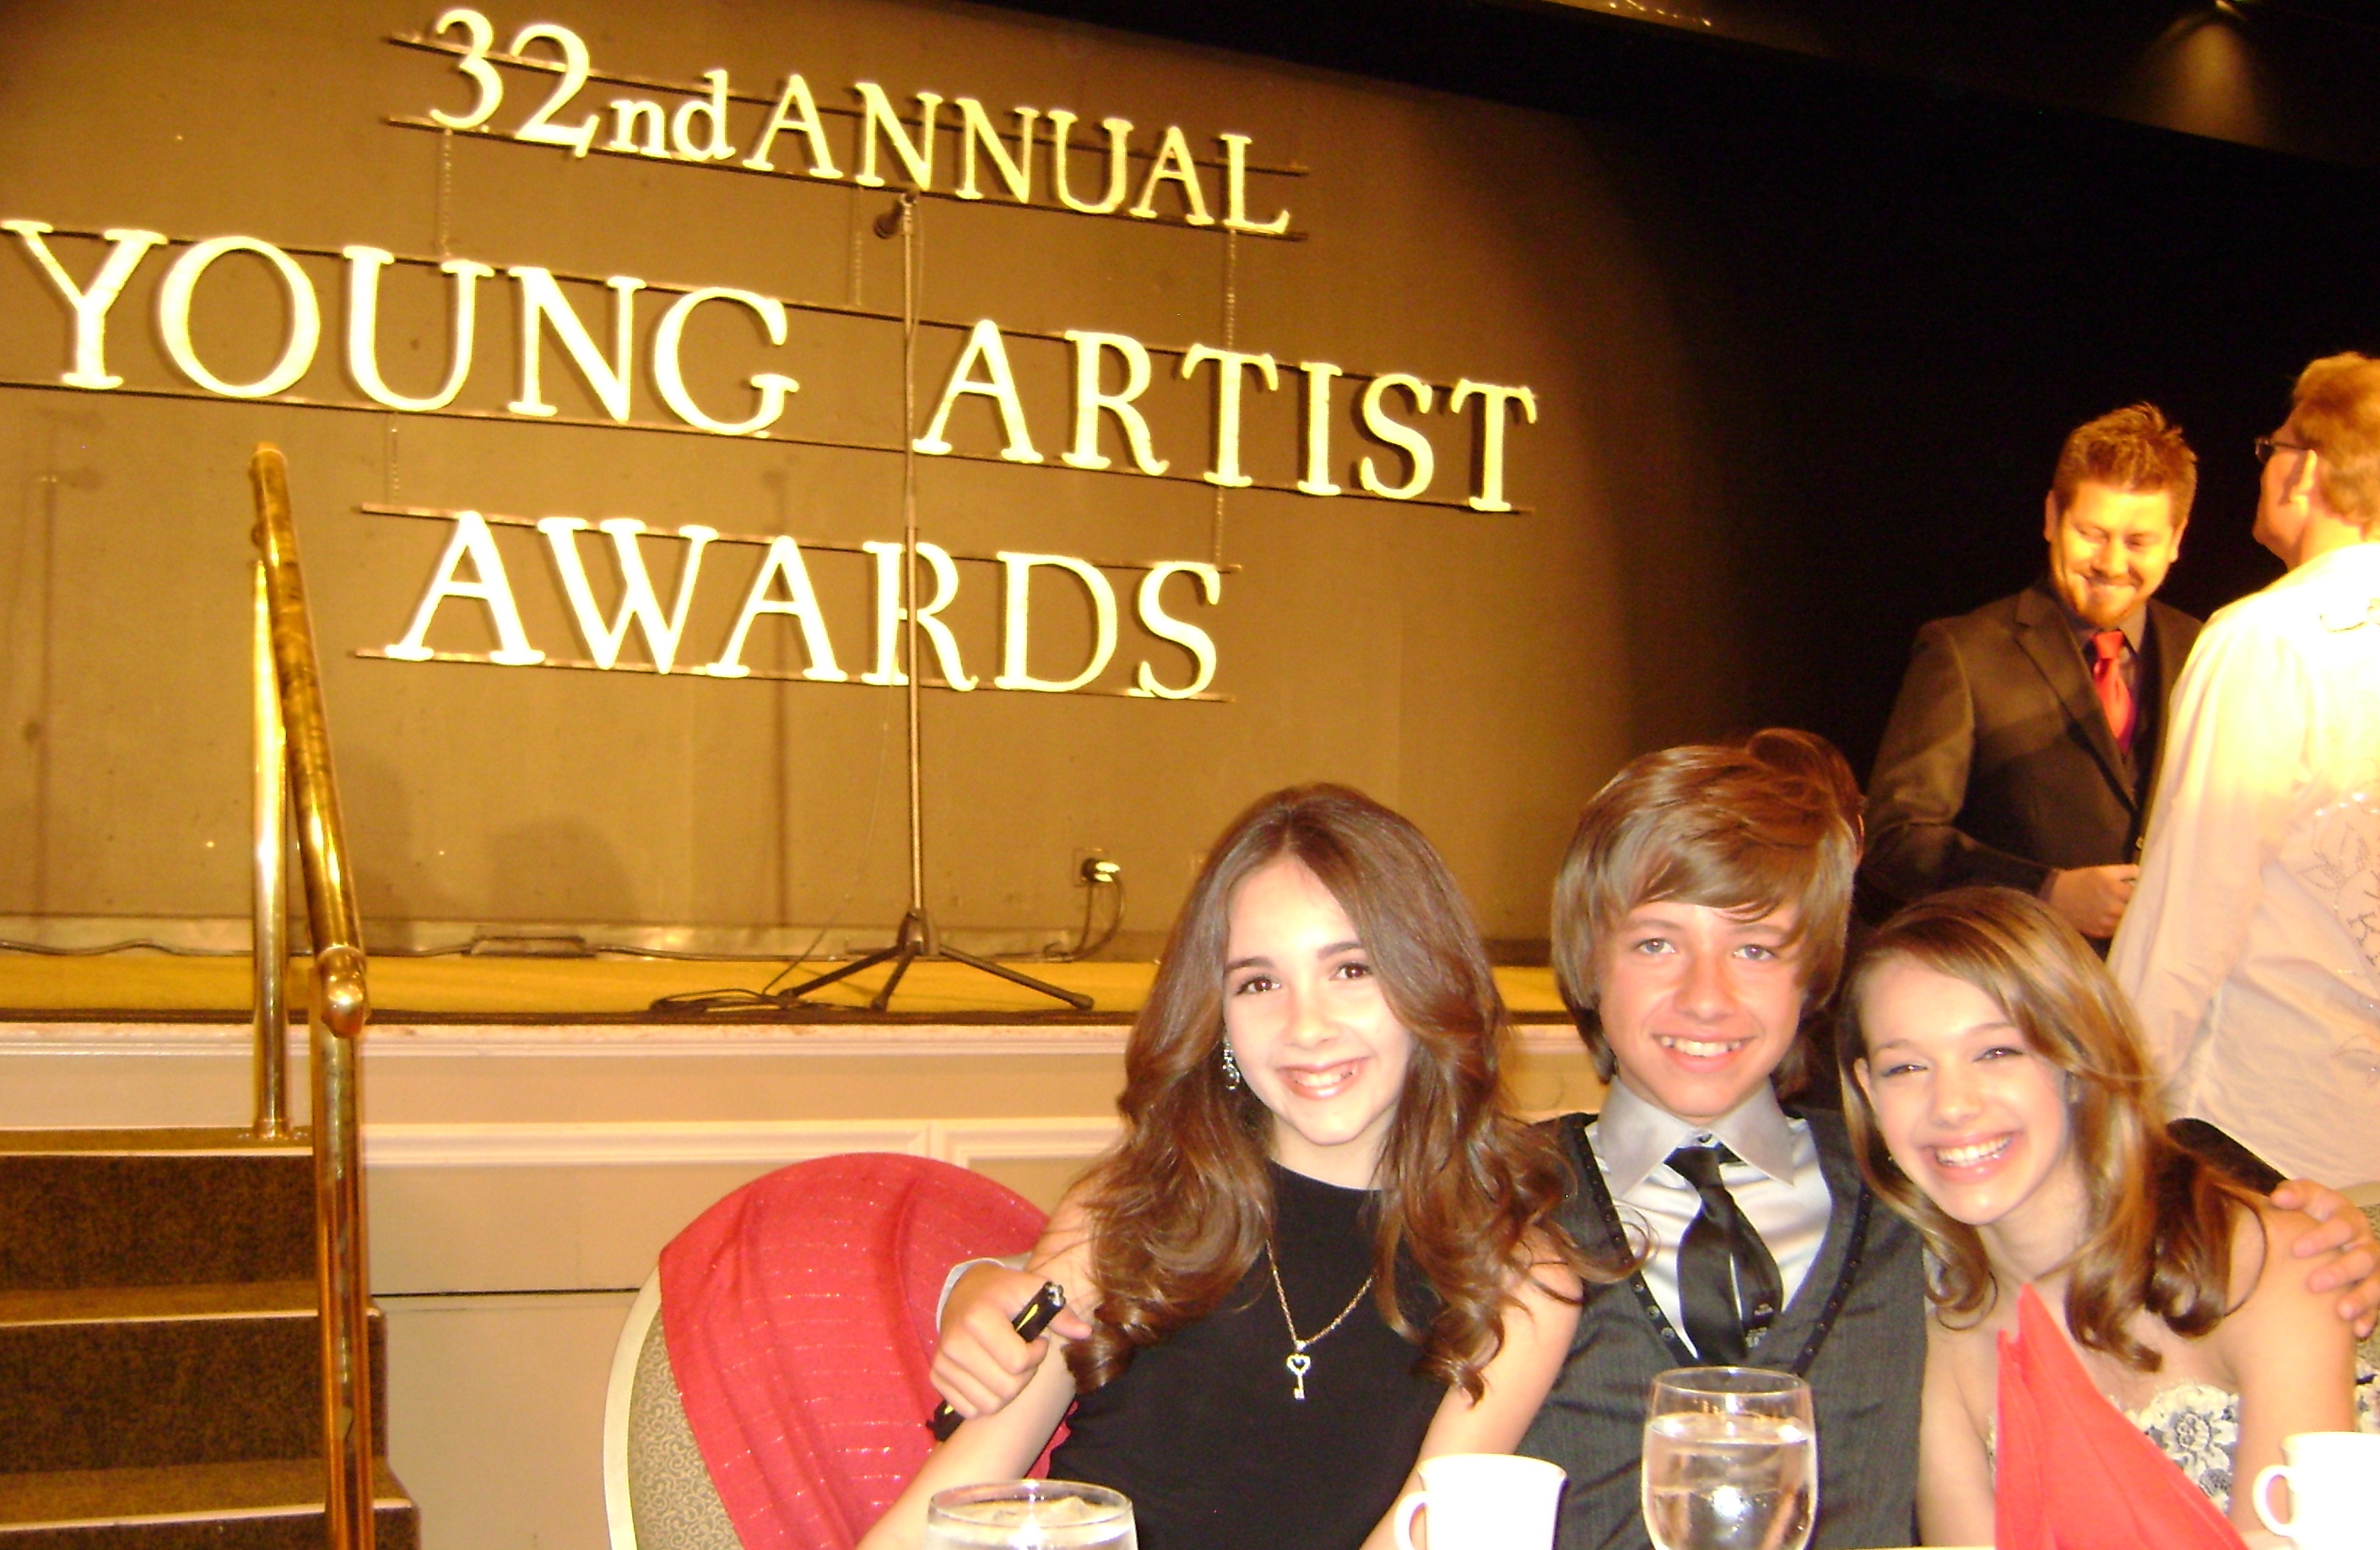 32nd Annual Young Artists Awards - Austin Coleman with Haley Pullos and Sadie Calvano